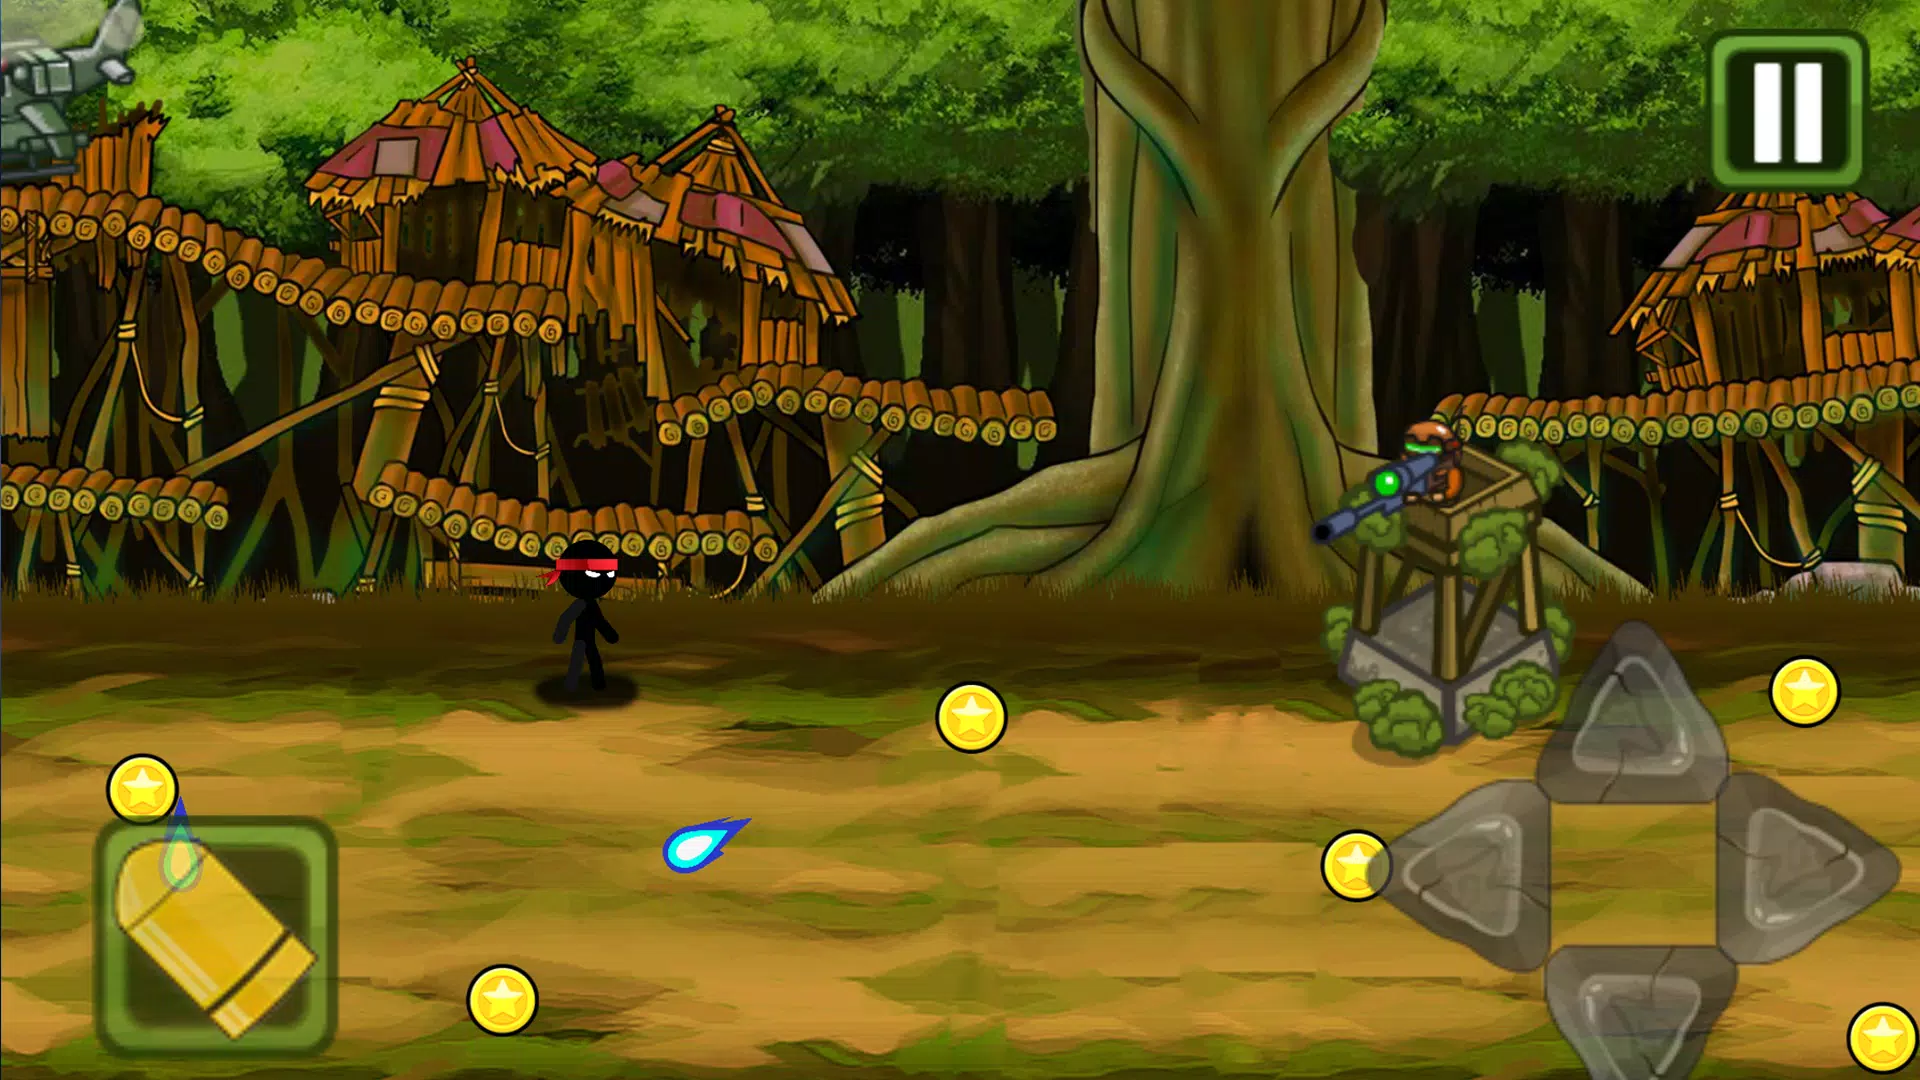 Angry stick fighter 2017 Download APK for Android (Free)